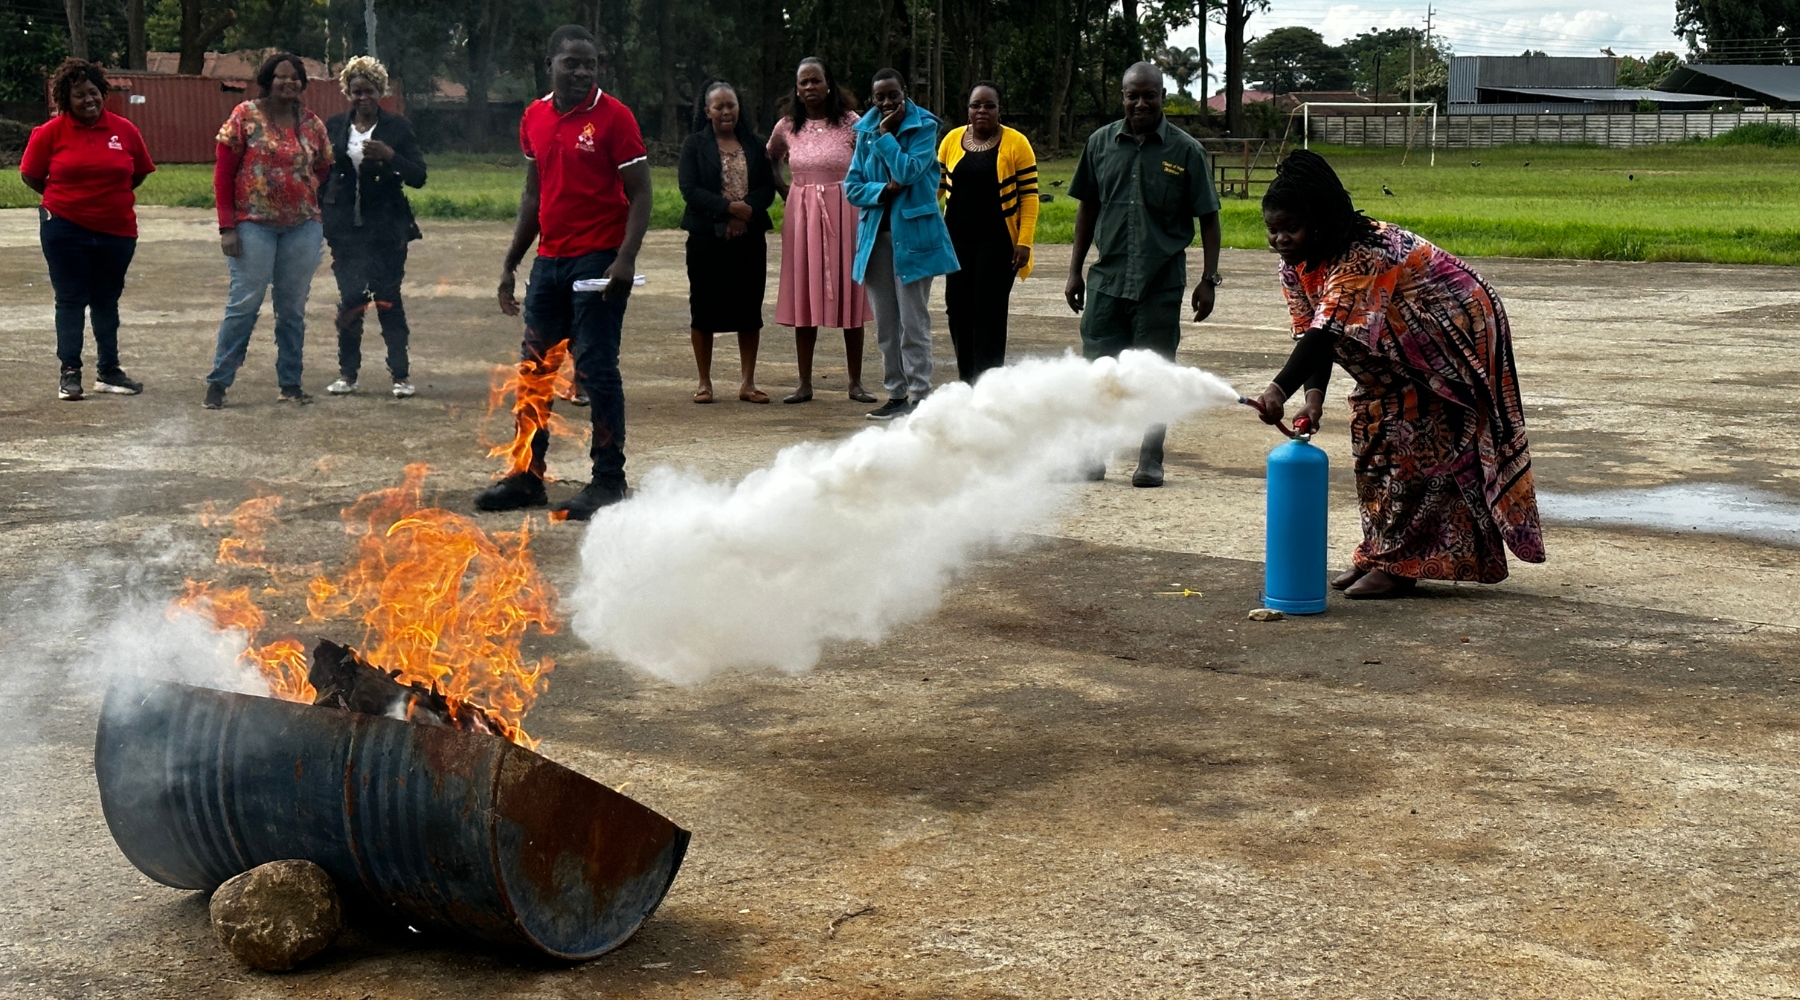 An adult holding a fire extinguisher and putting out a fire on a barrel with others watching. 